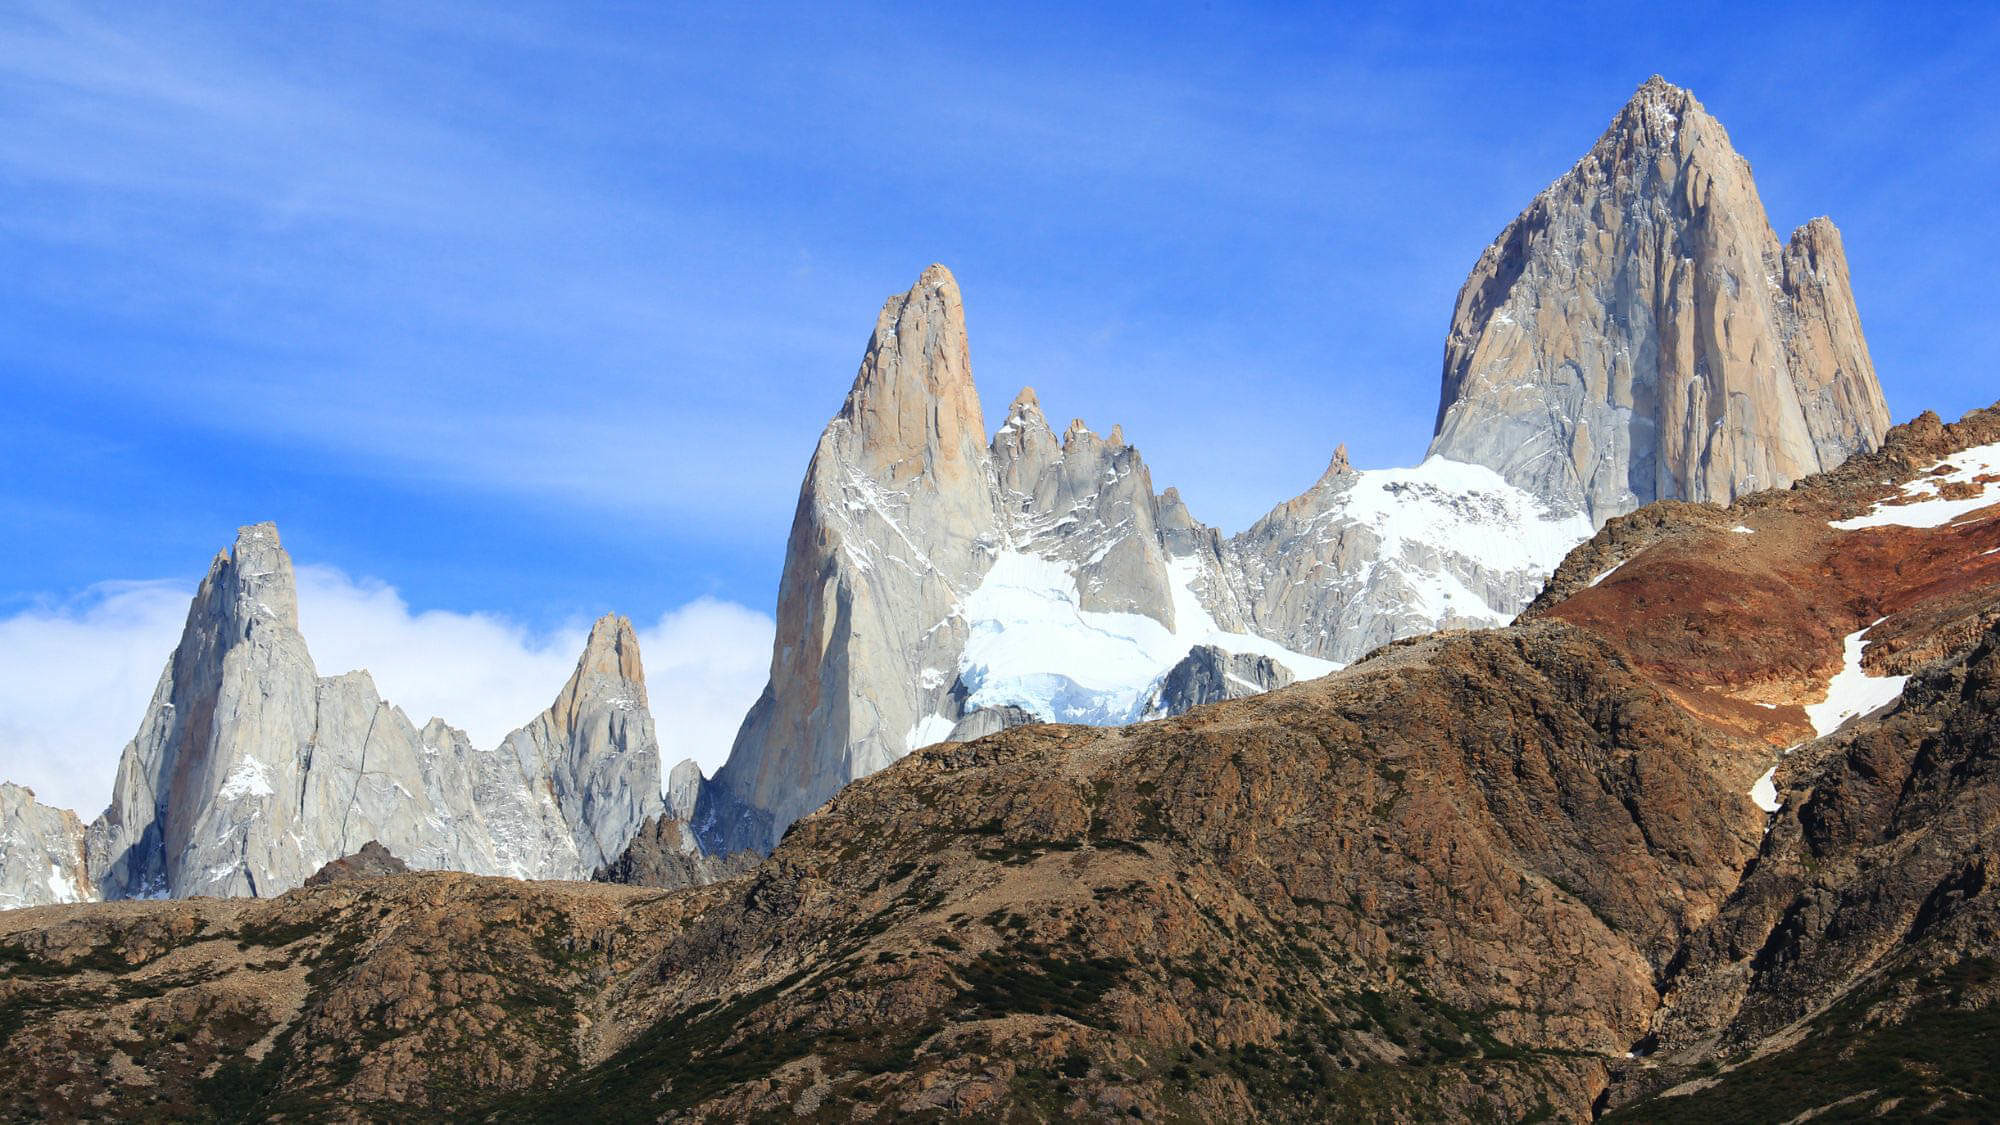 View of Mount Fitz Roy from one of the lookout points.